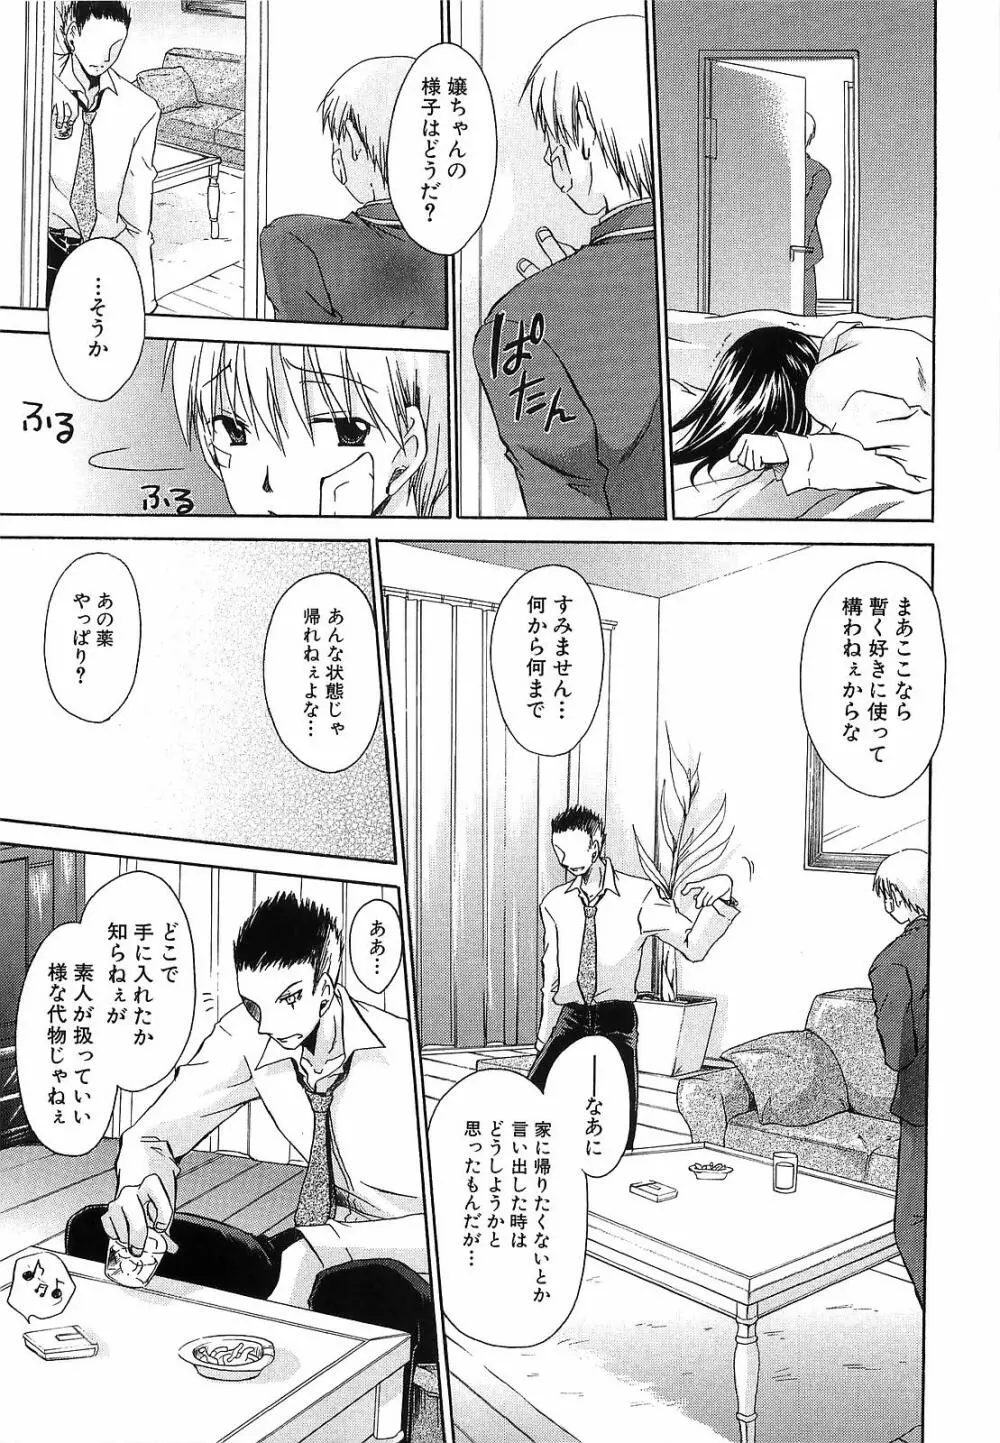 LOVE & HATE 3 FINAL～ENGAGE～通常版 Page.92